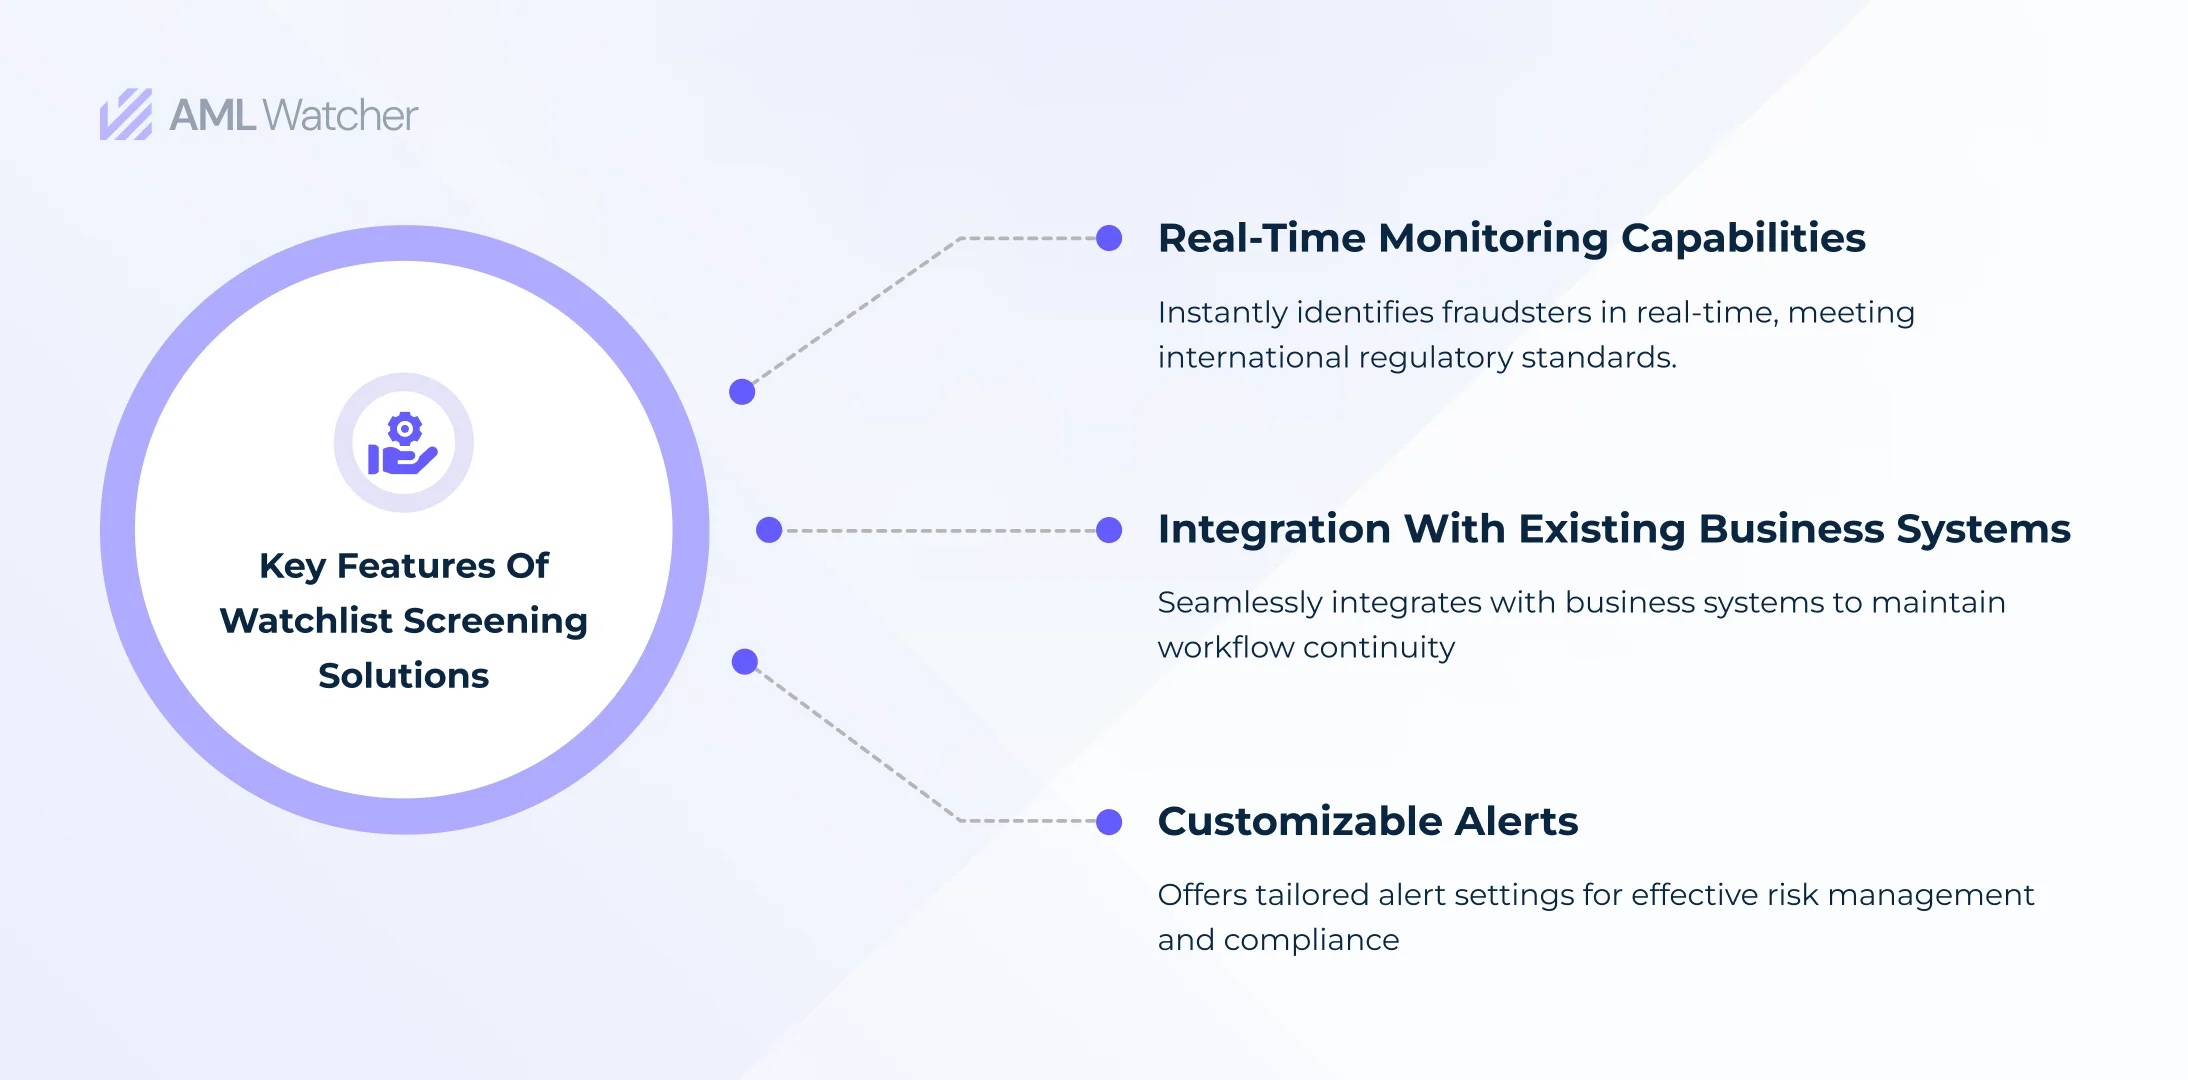 Underlying important features of the watchlist monitoring service that form the crux of protecting businesses against threats.